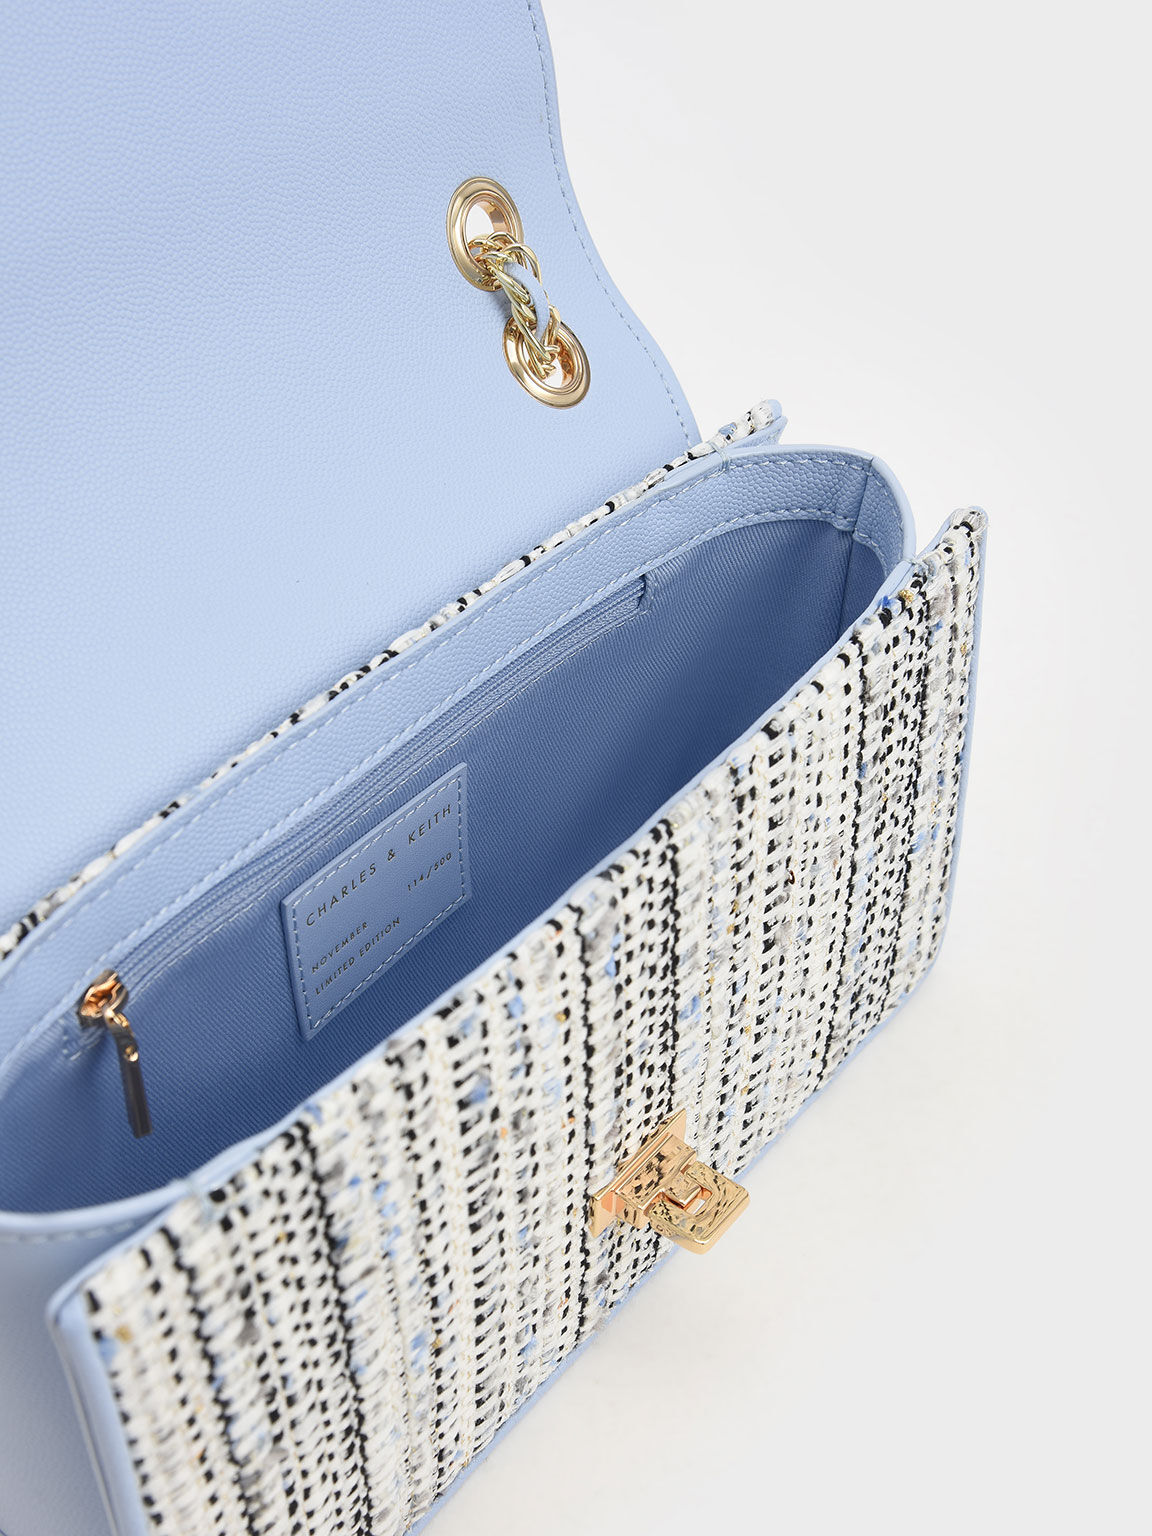 TÚI CHARLES KEITH C-CAPSULE COLLECTION: EVERETTE CHAIN-STRAP SHOULDER BAG 14